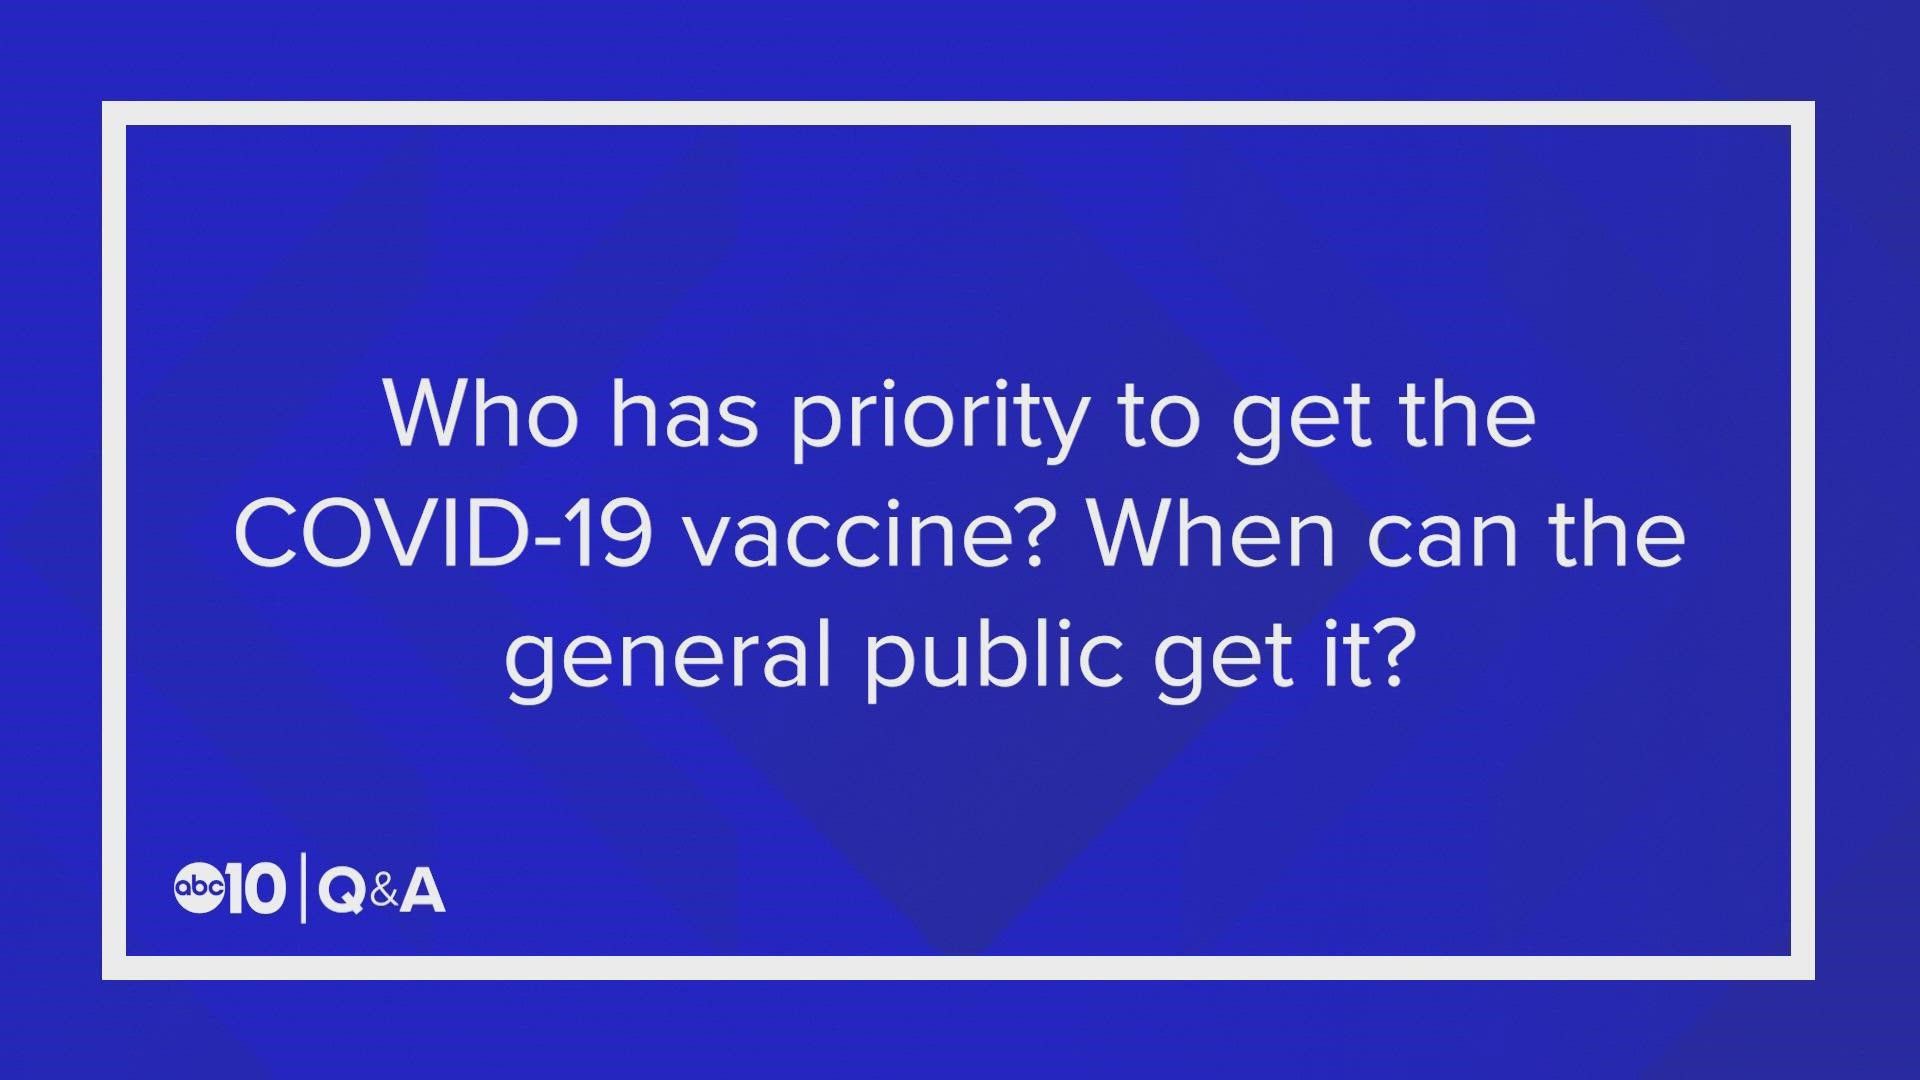 From when the general public will get the vaccine to who has first priority, ABC10 Health Expert Dr. Tom Hopkins answers viewer questions about the COVID-19 vaccine.